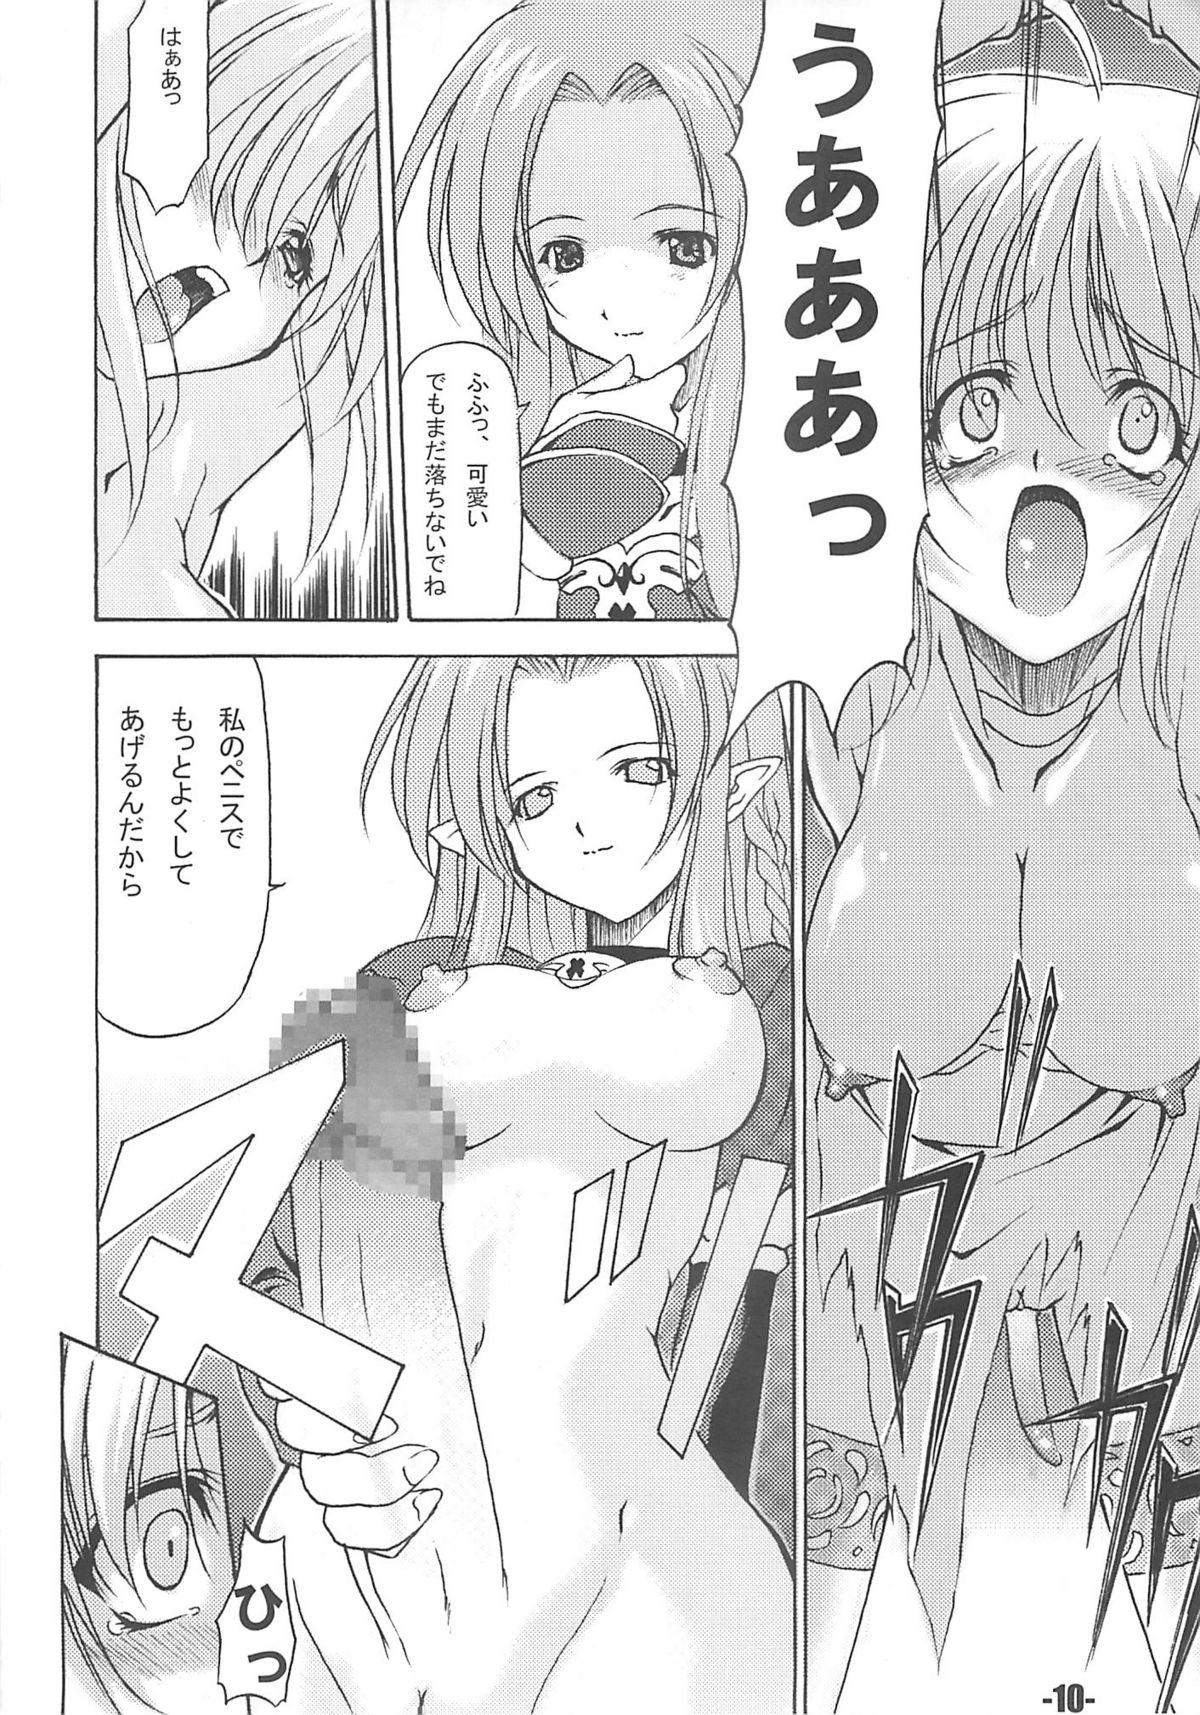 Plug EXtra stage vol. 13 - Fate stay night Virtual - Page 9